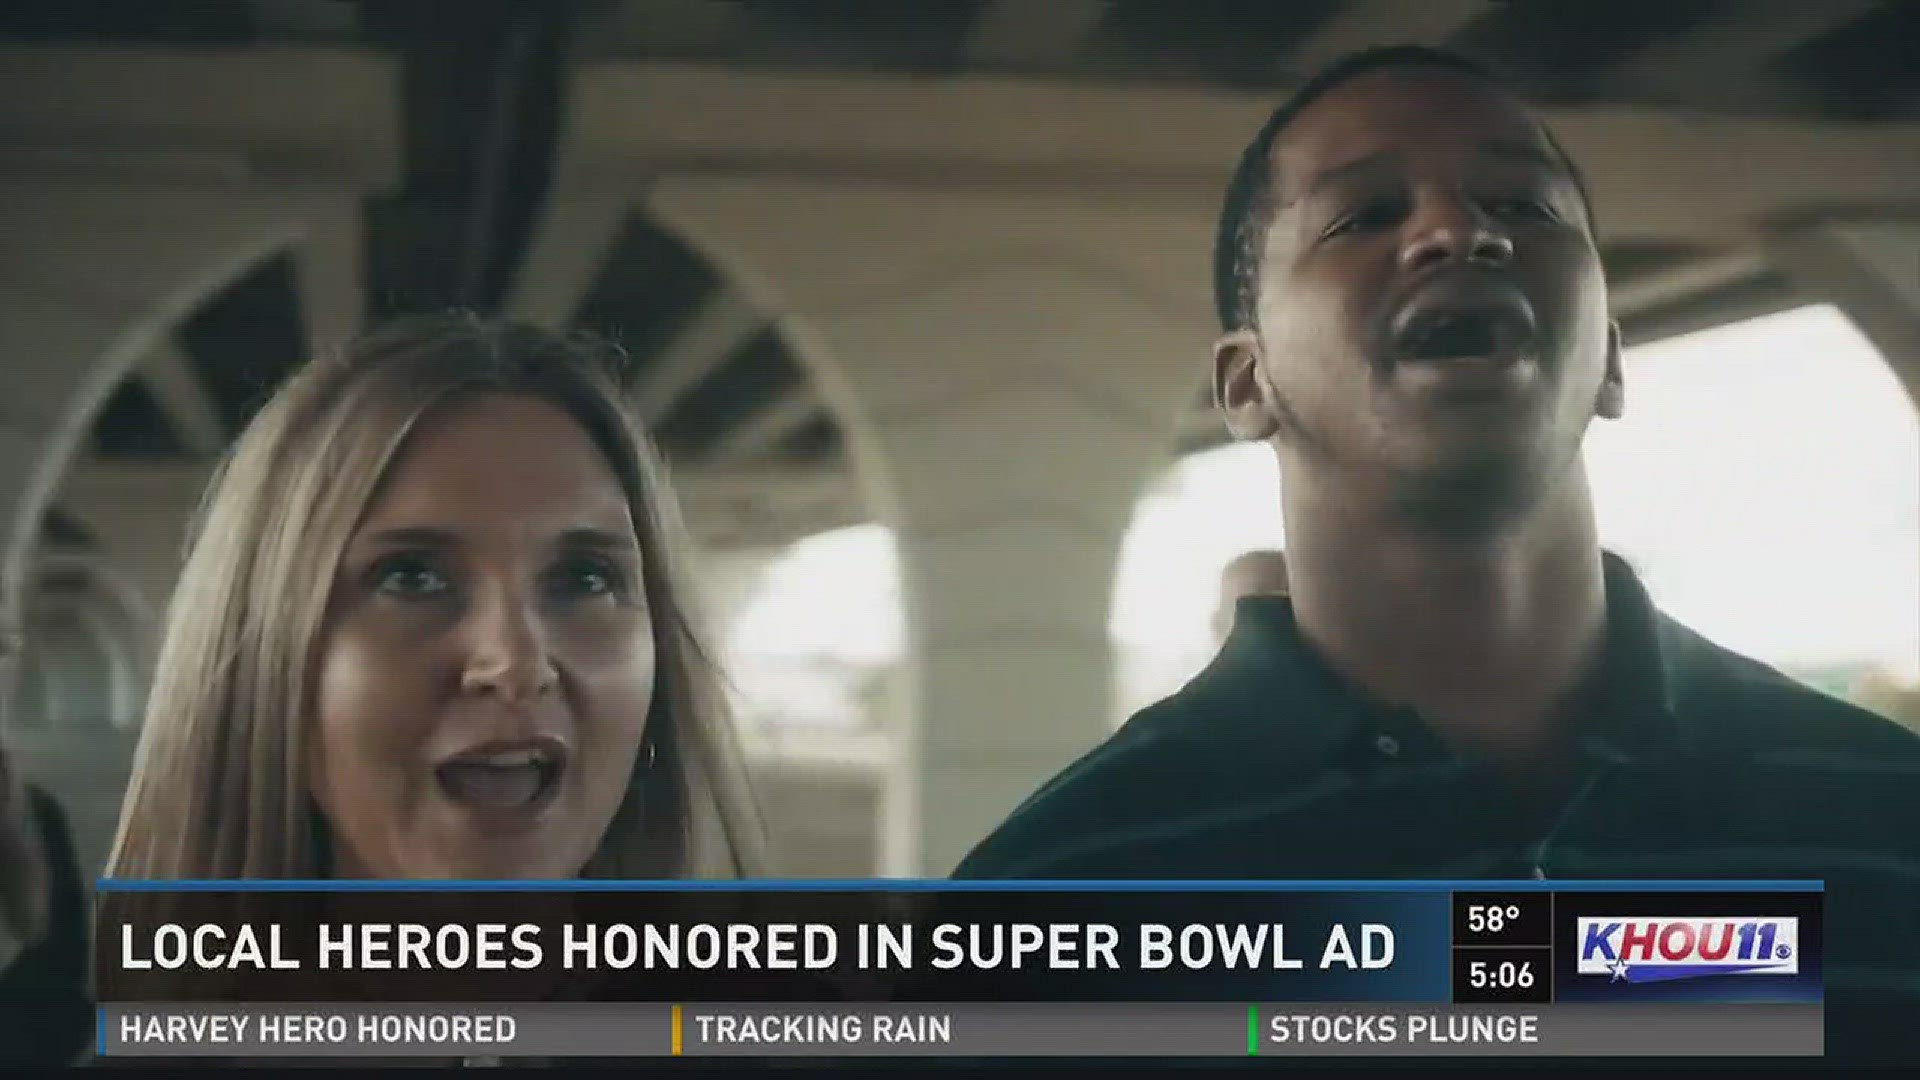 Three people from Texas were featured in Mass Mutual's Super Bowl ad Sunday night.